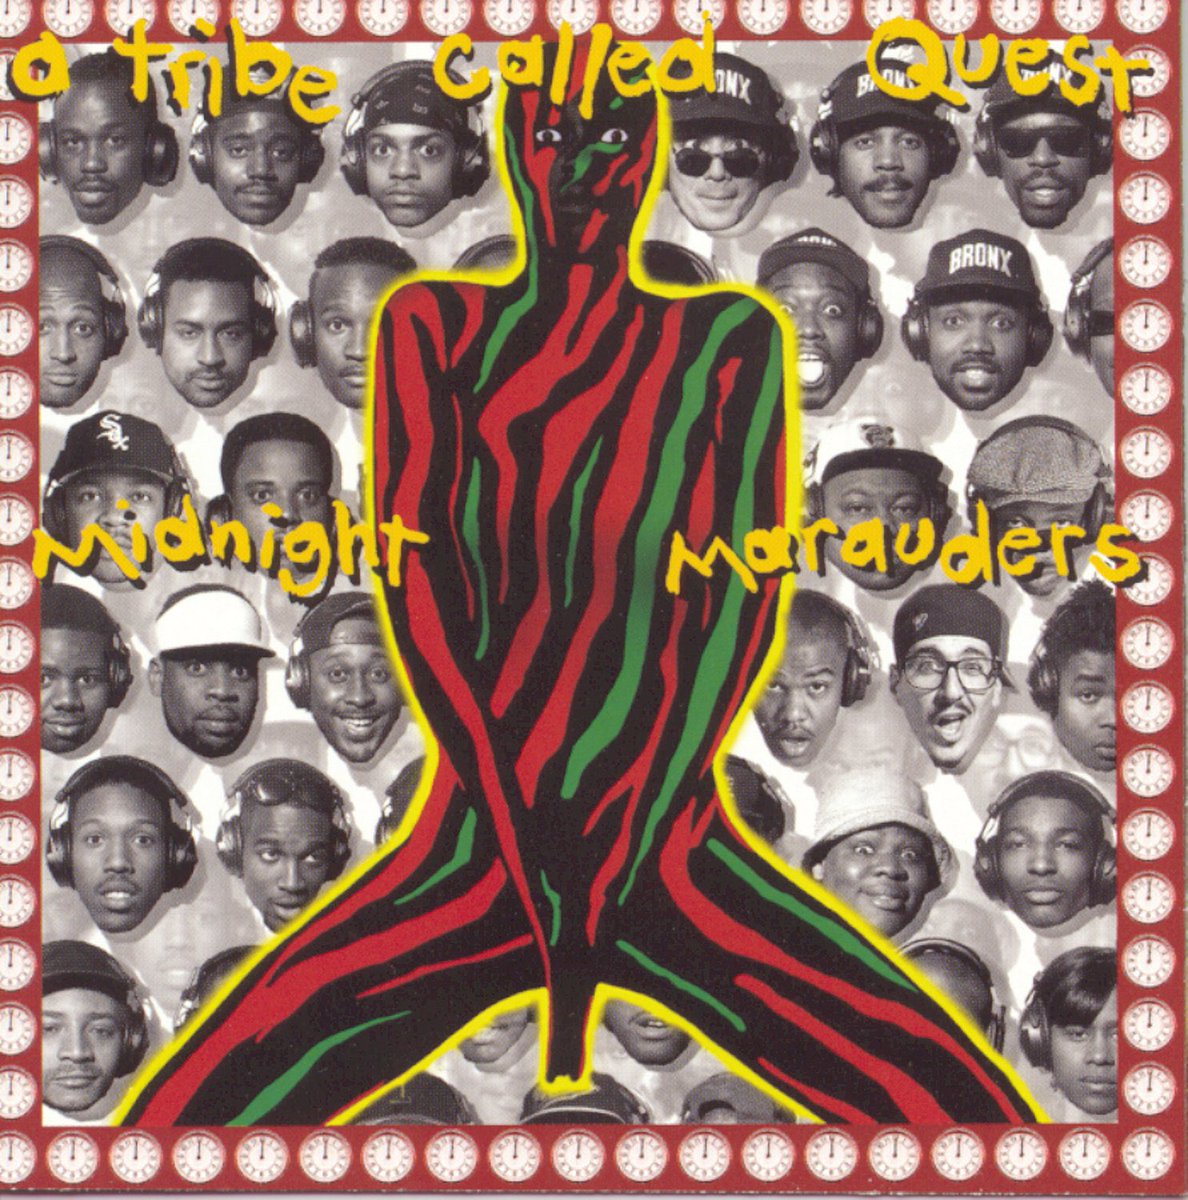 29 years to the day since Hip Hop’s most iconic music release day. We listen to Enter the Wu-Tang (36 Chambers) and Midnight Marauders today.